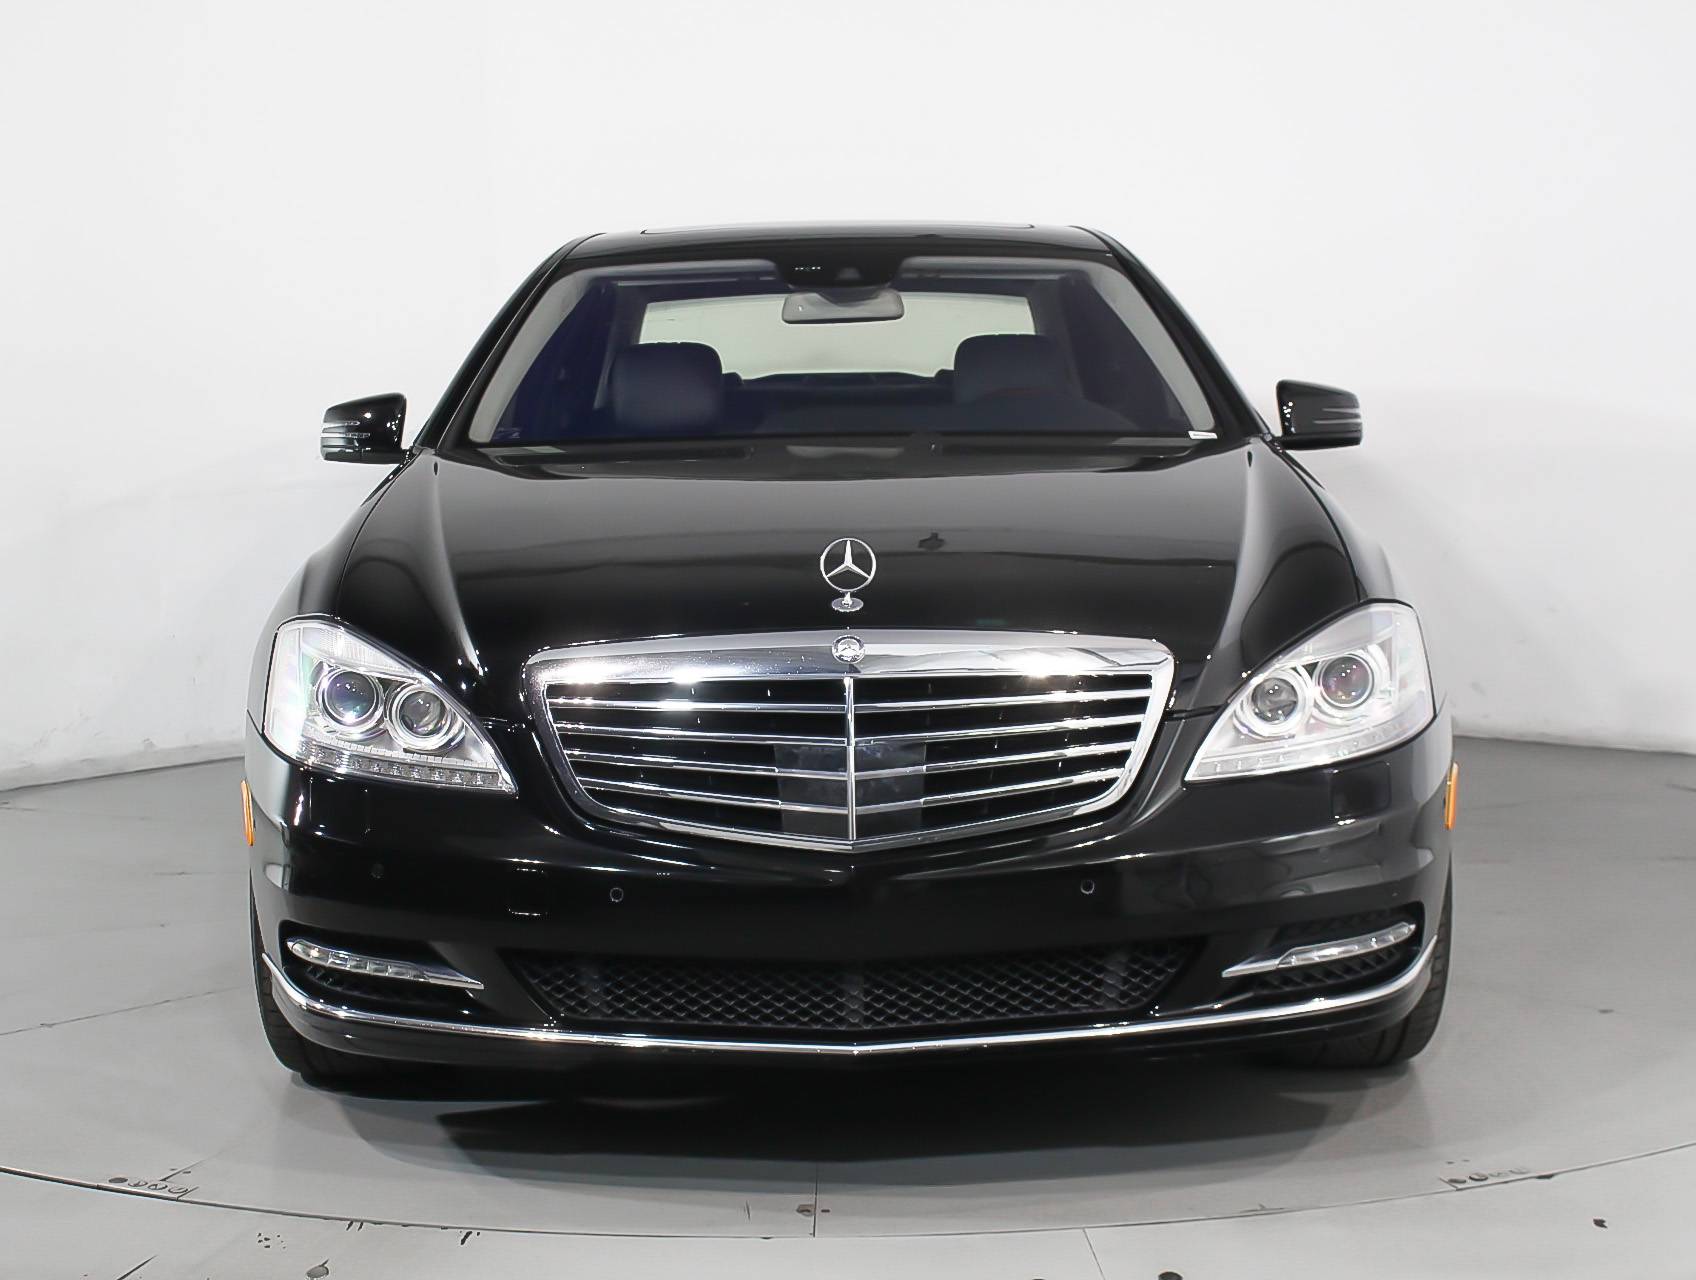 Florida Fine Cars - Used MERCEDES-BENZ S CLASS 2013 HOLLYWOOD S550